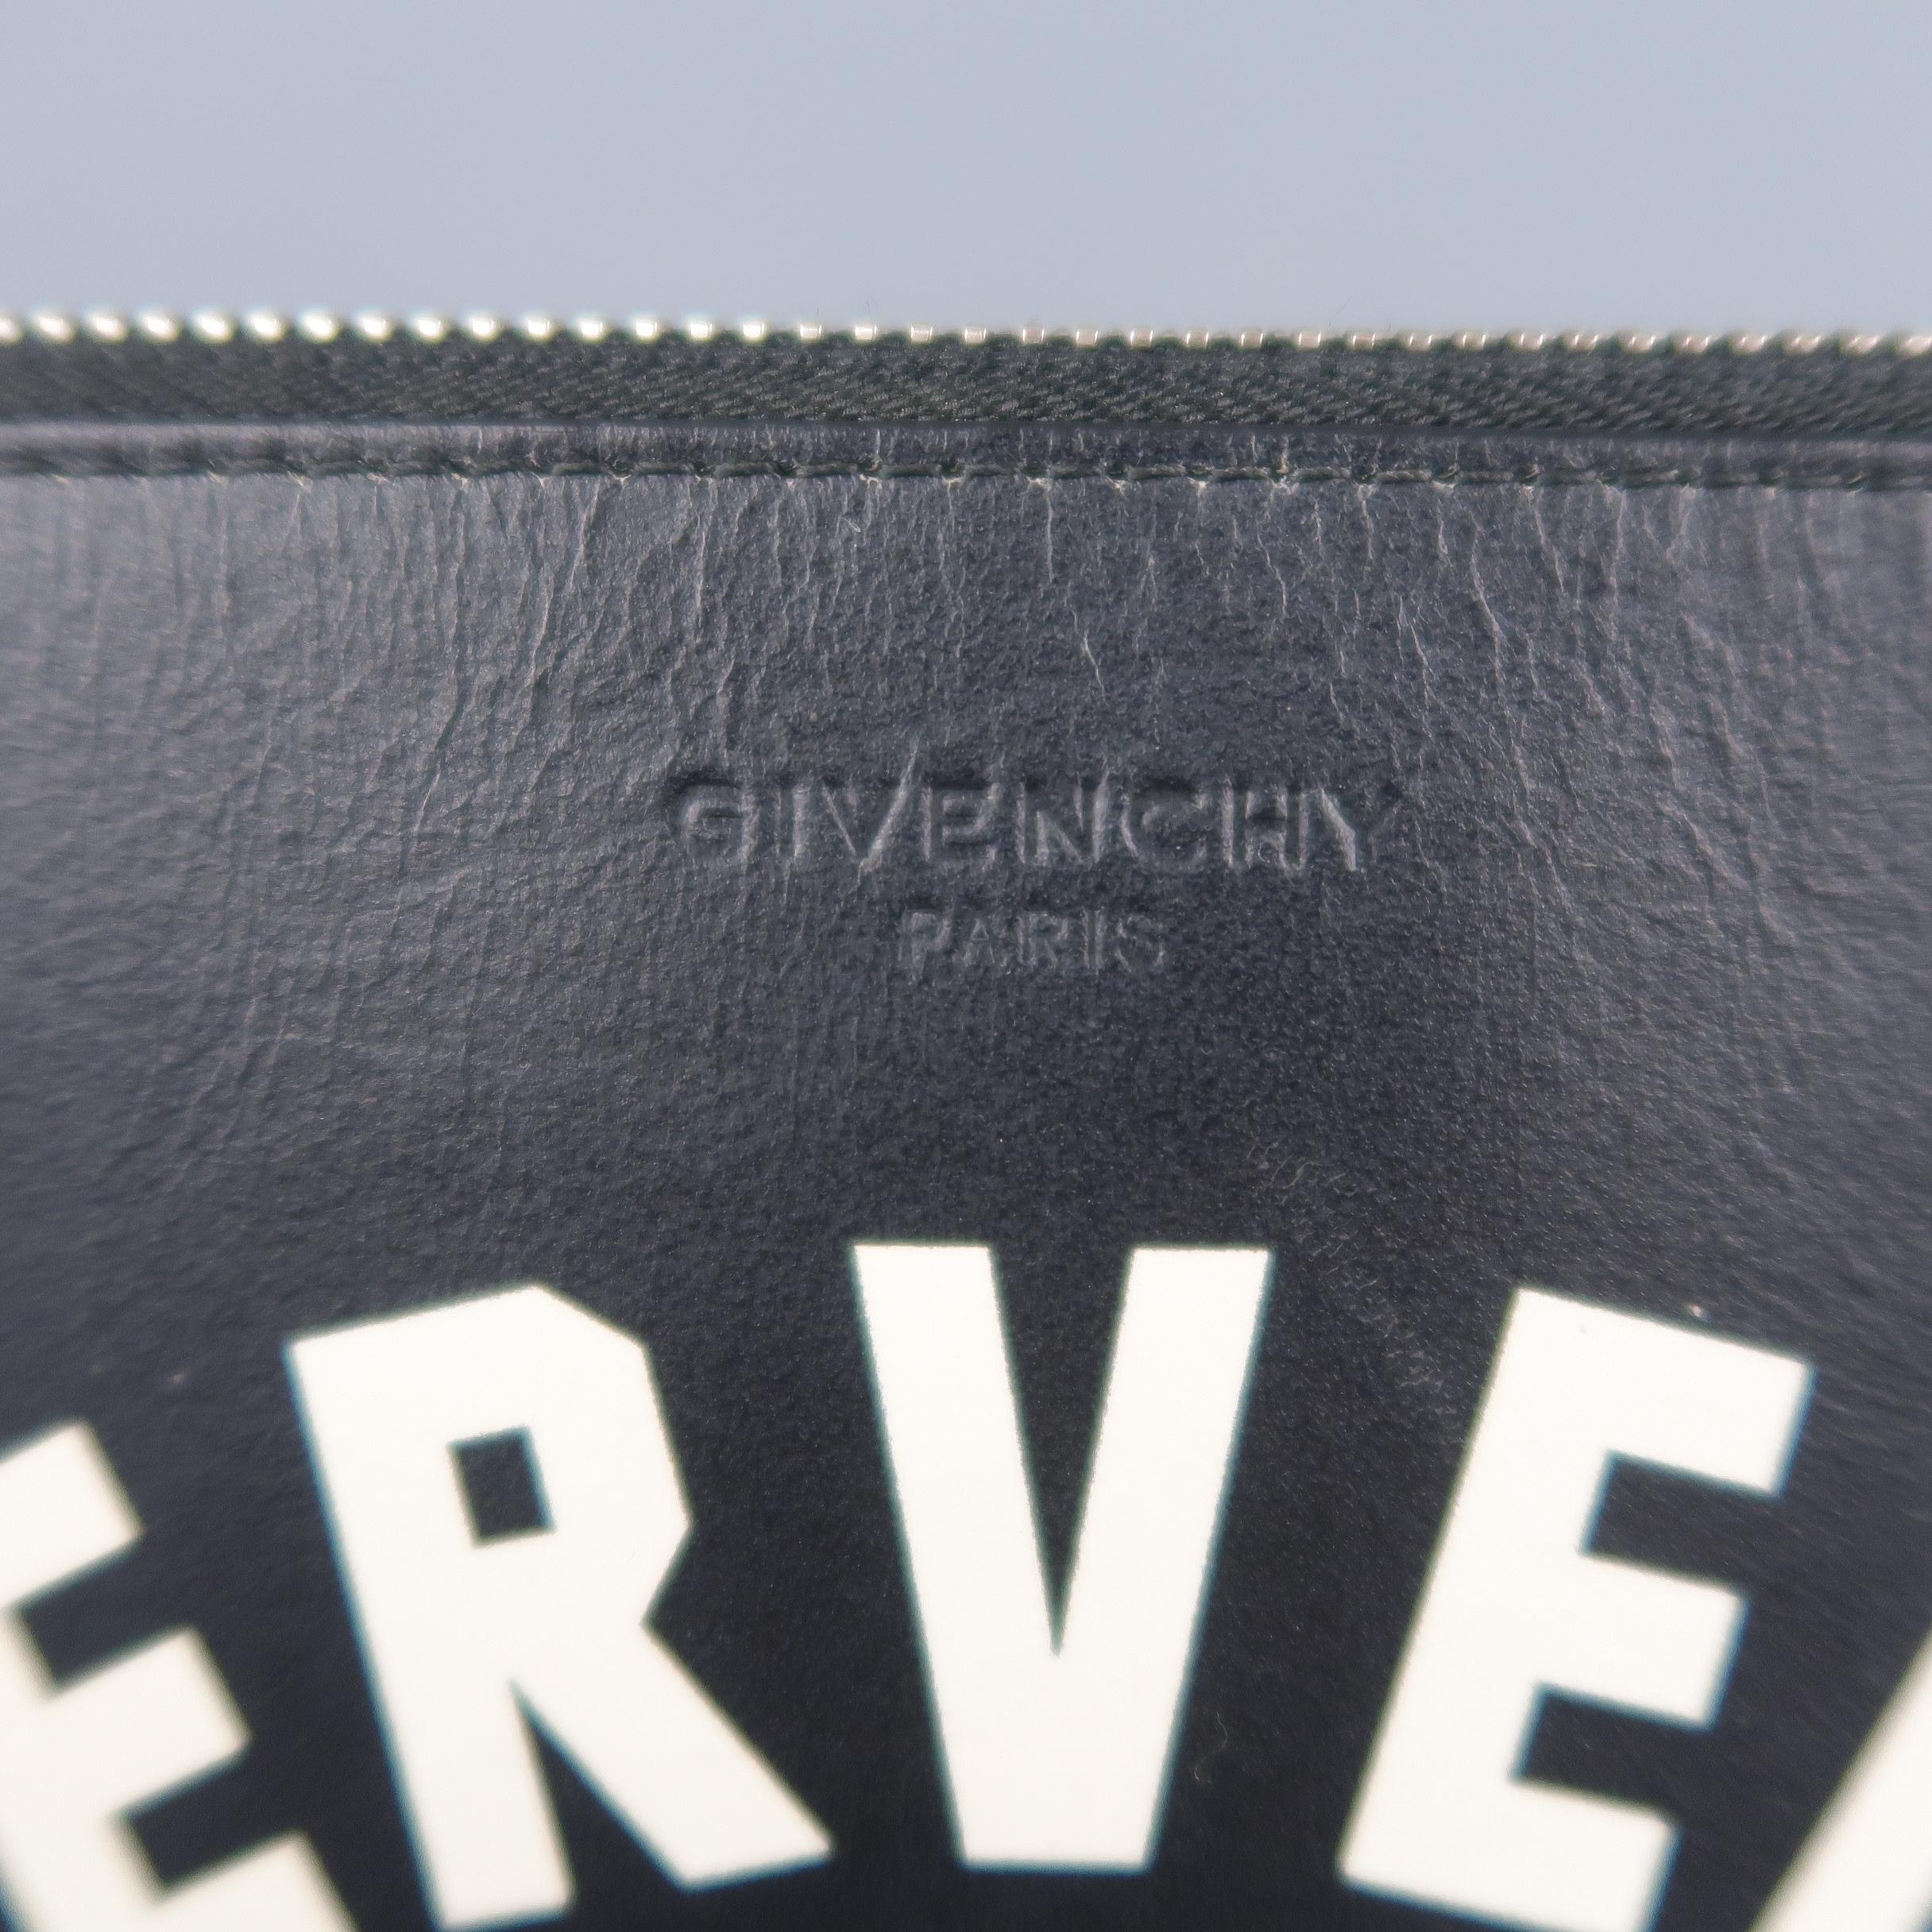 GIVENCHY by RICCARDO TISCI men's pouch clutch comes in black leather with a top zip, embossed logo, leather interior, and cream 